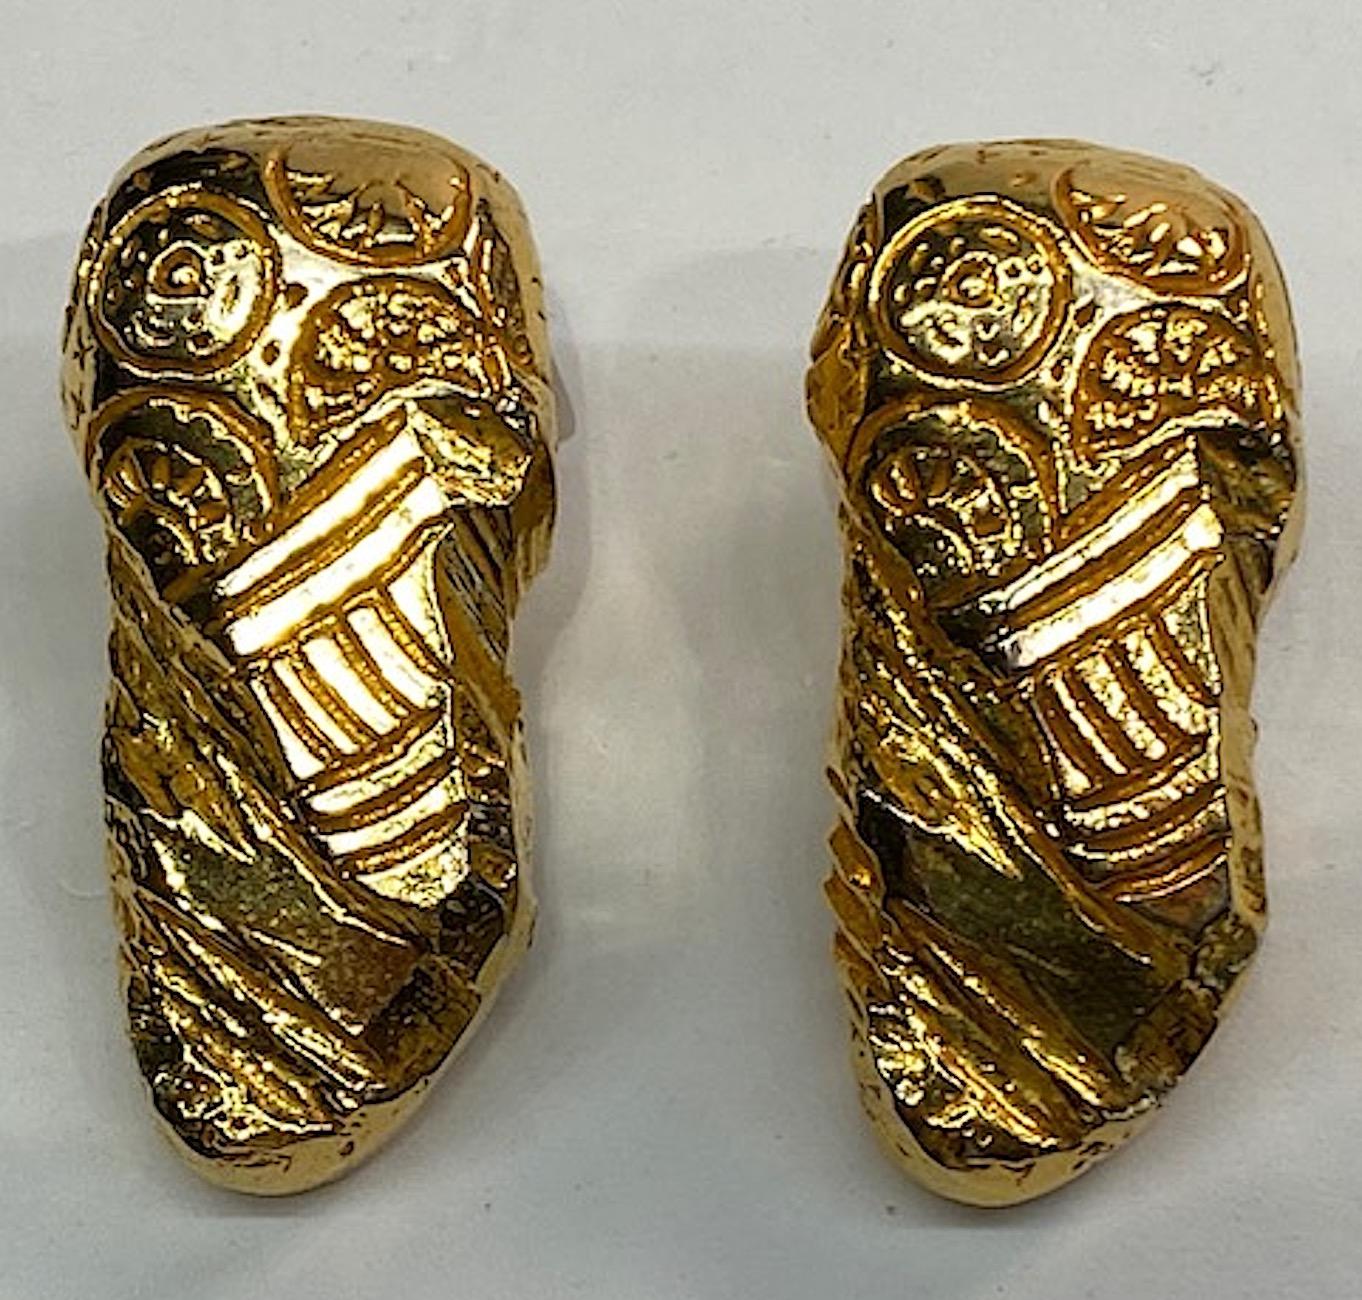 A wonderful abstract pair of 1980s Dominique Aurientis earrings. Three dimensional and beautifully cast golden nuggets with surface designs. Each earring measures 1 inch wide, 2.13 inches long and .5 of an inch deep not including the clasp. Back of